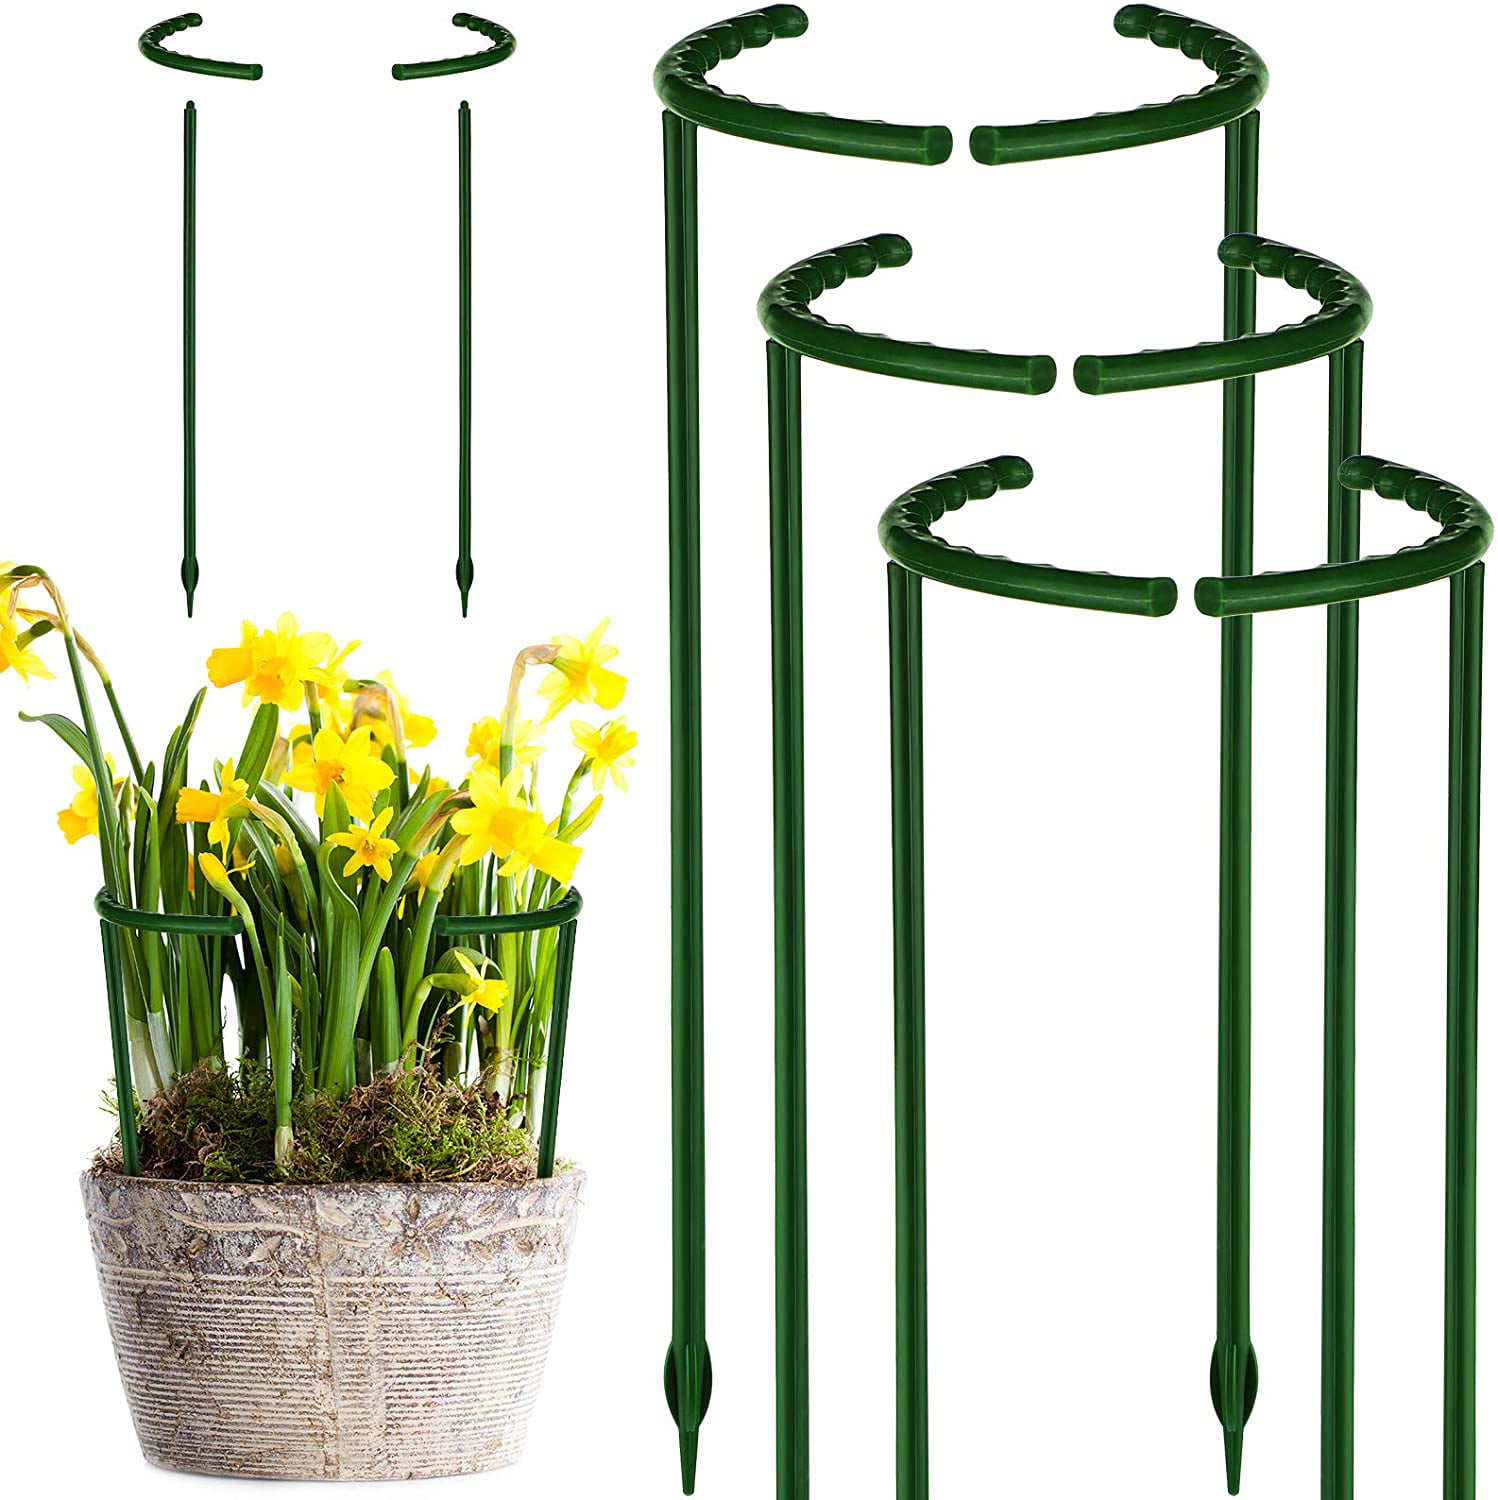 10, 5.7 x 5.9 Inch Plant Support Garden Flower Support Stake Half Round Plant Support Ring Plastic Plant Cage Holder Flower Pot Climbing Trellis for Small Plant Flower Vegetable 